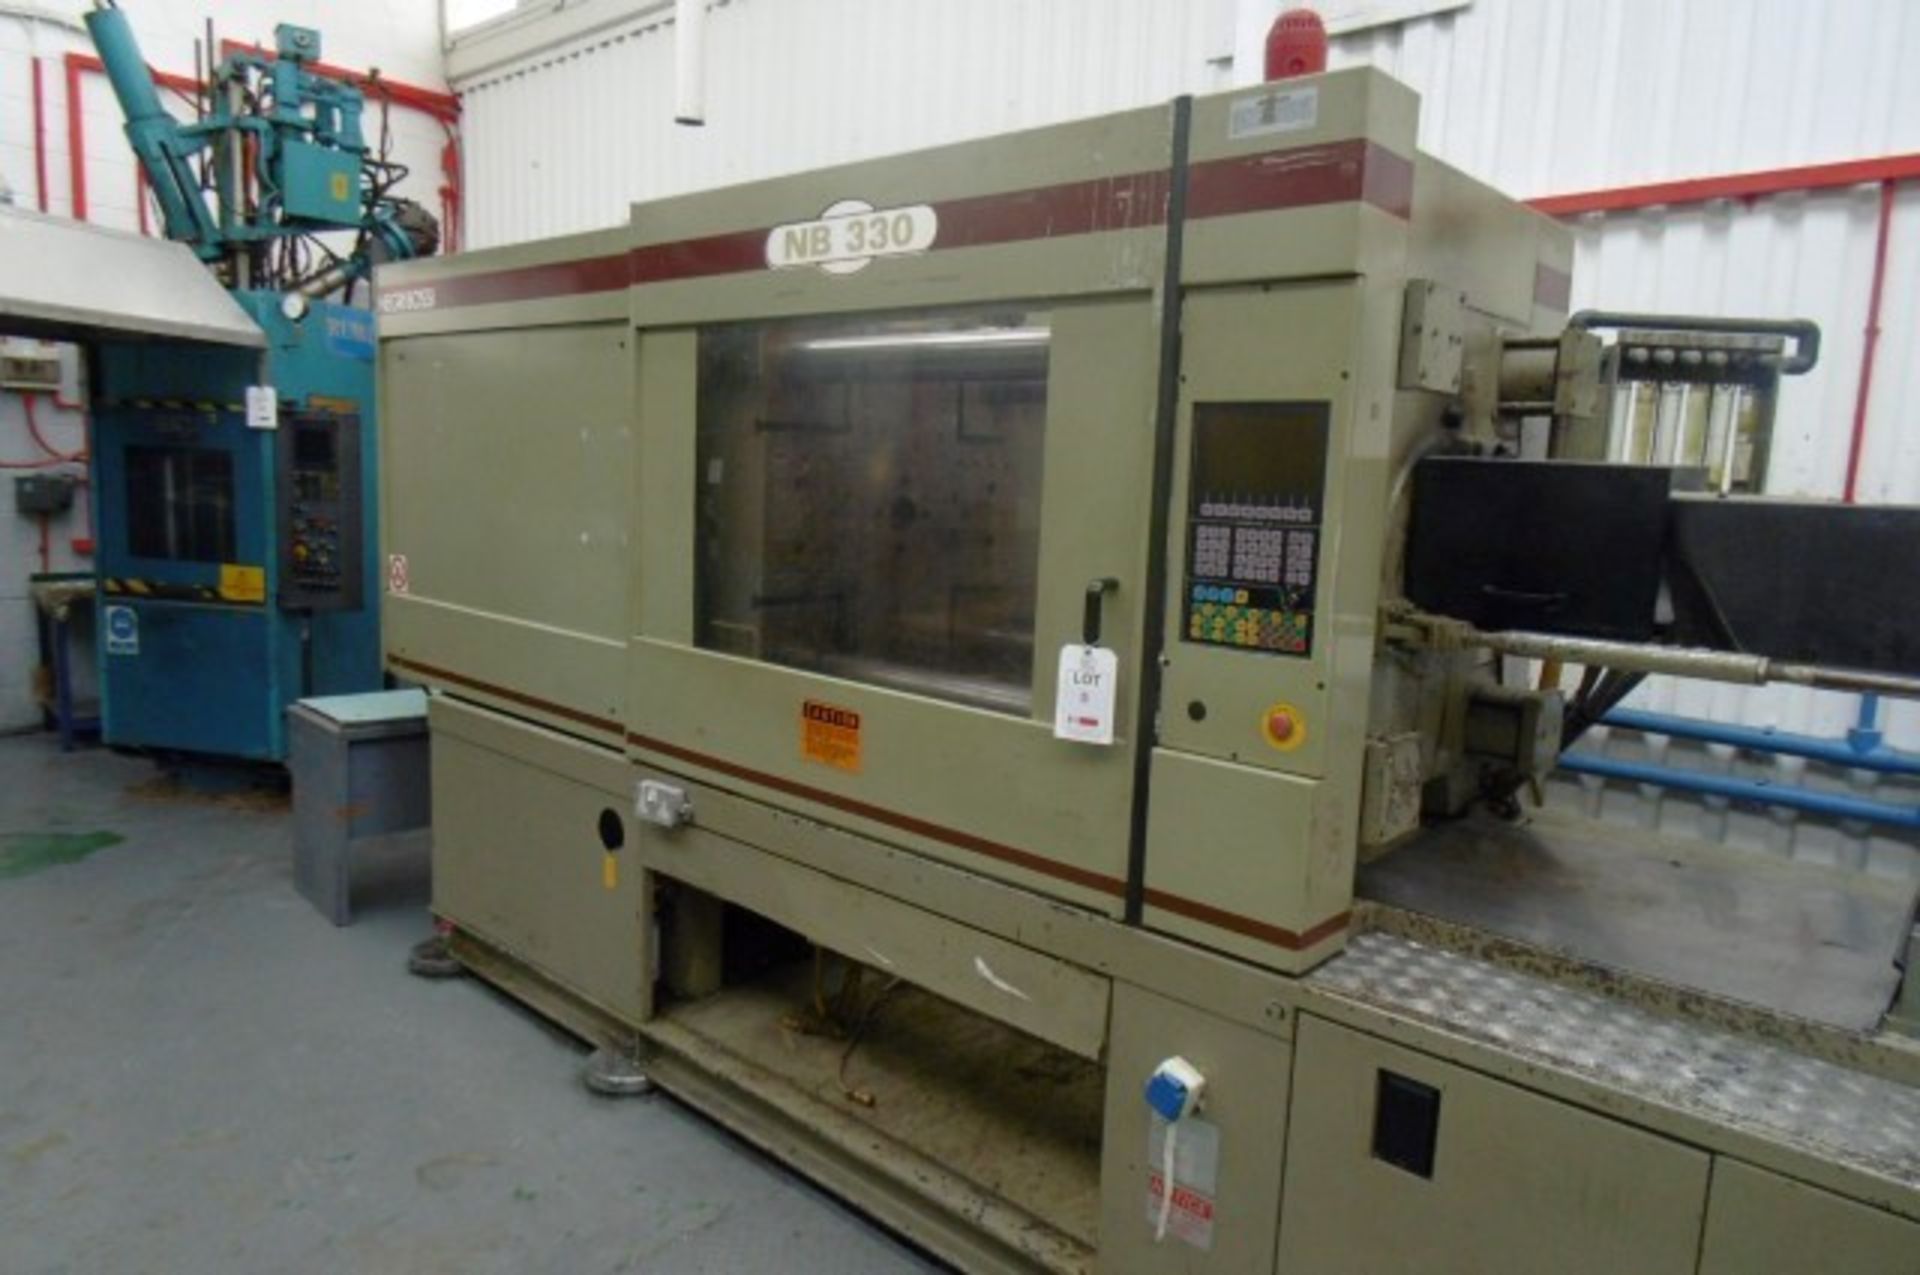 Negri Bossi NB330 horizontal plastic injection moulding machine Serial Number: 54-374 with - Image 2 of 3